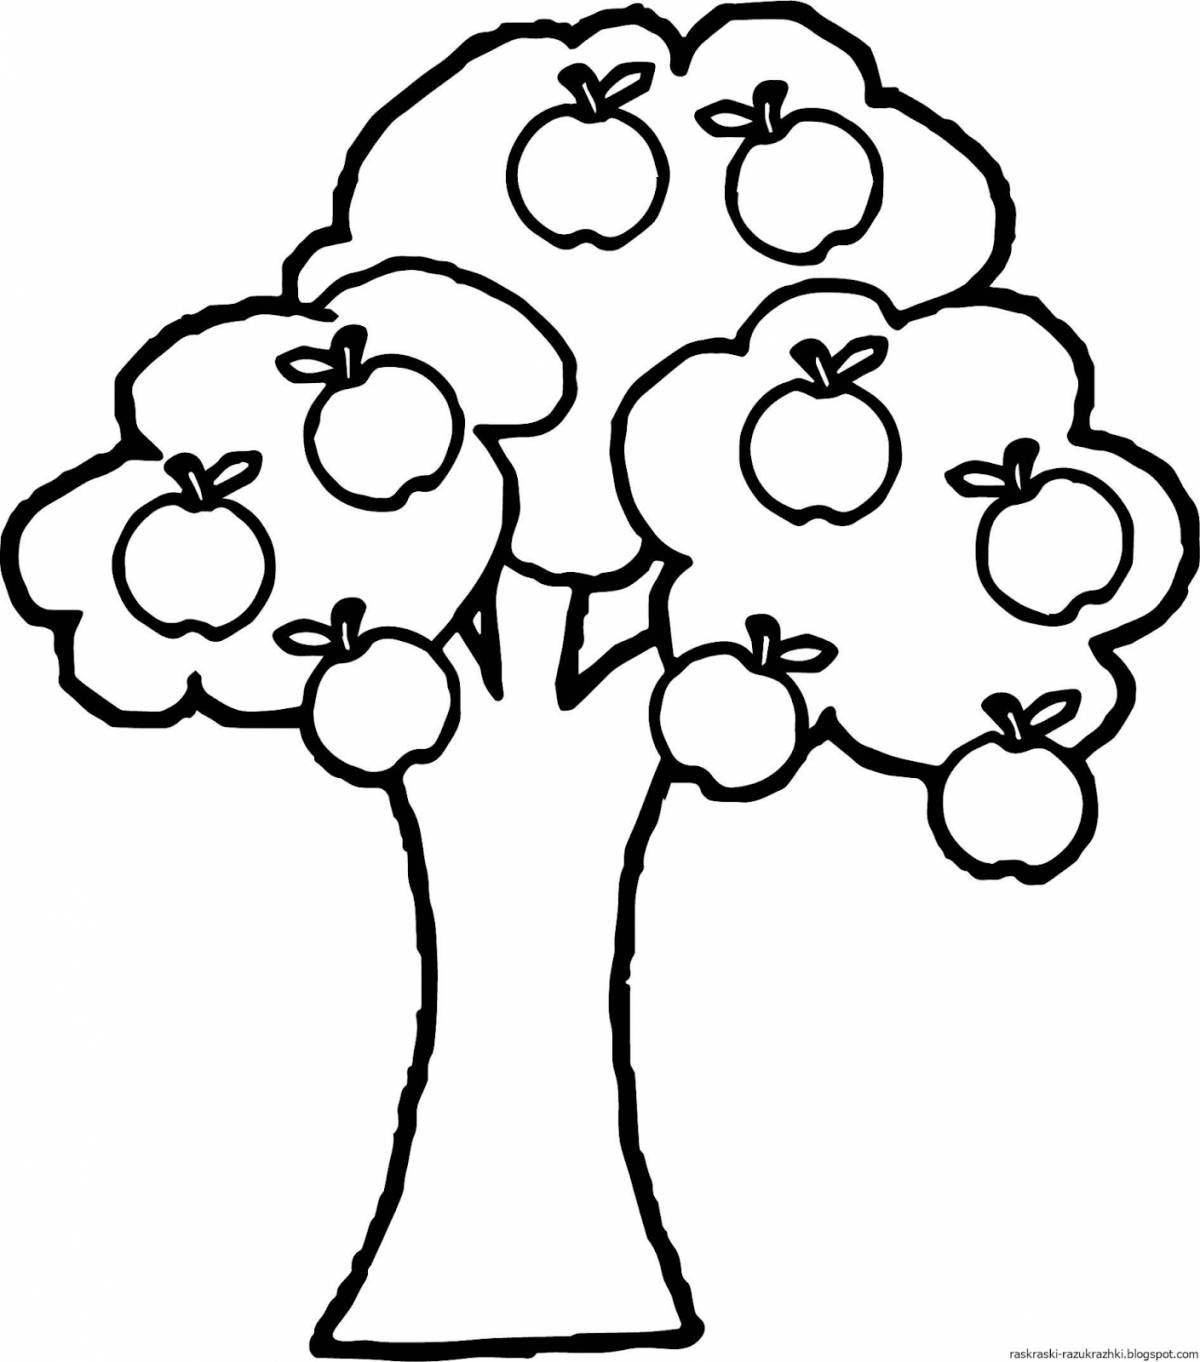 Colorful apple tree coloring book for kids